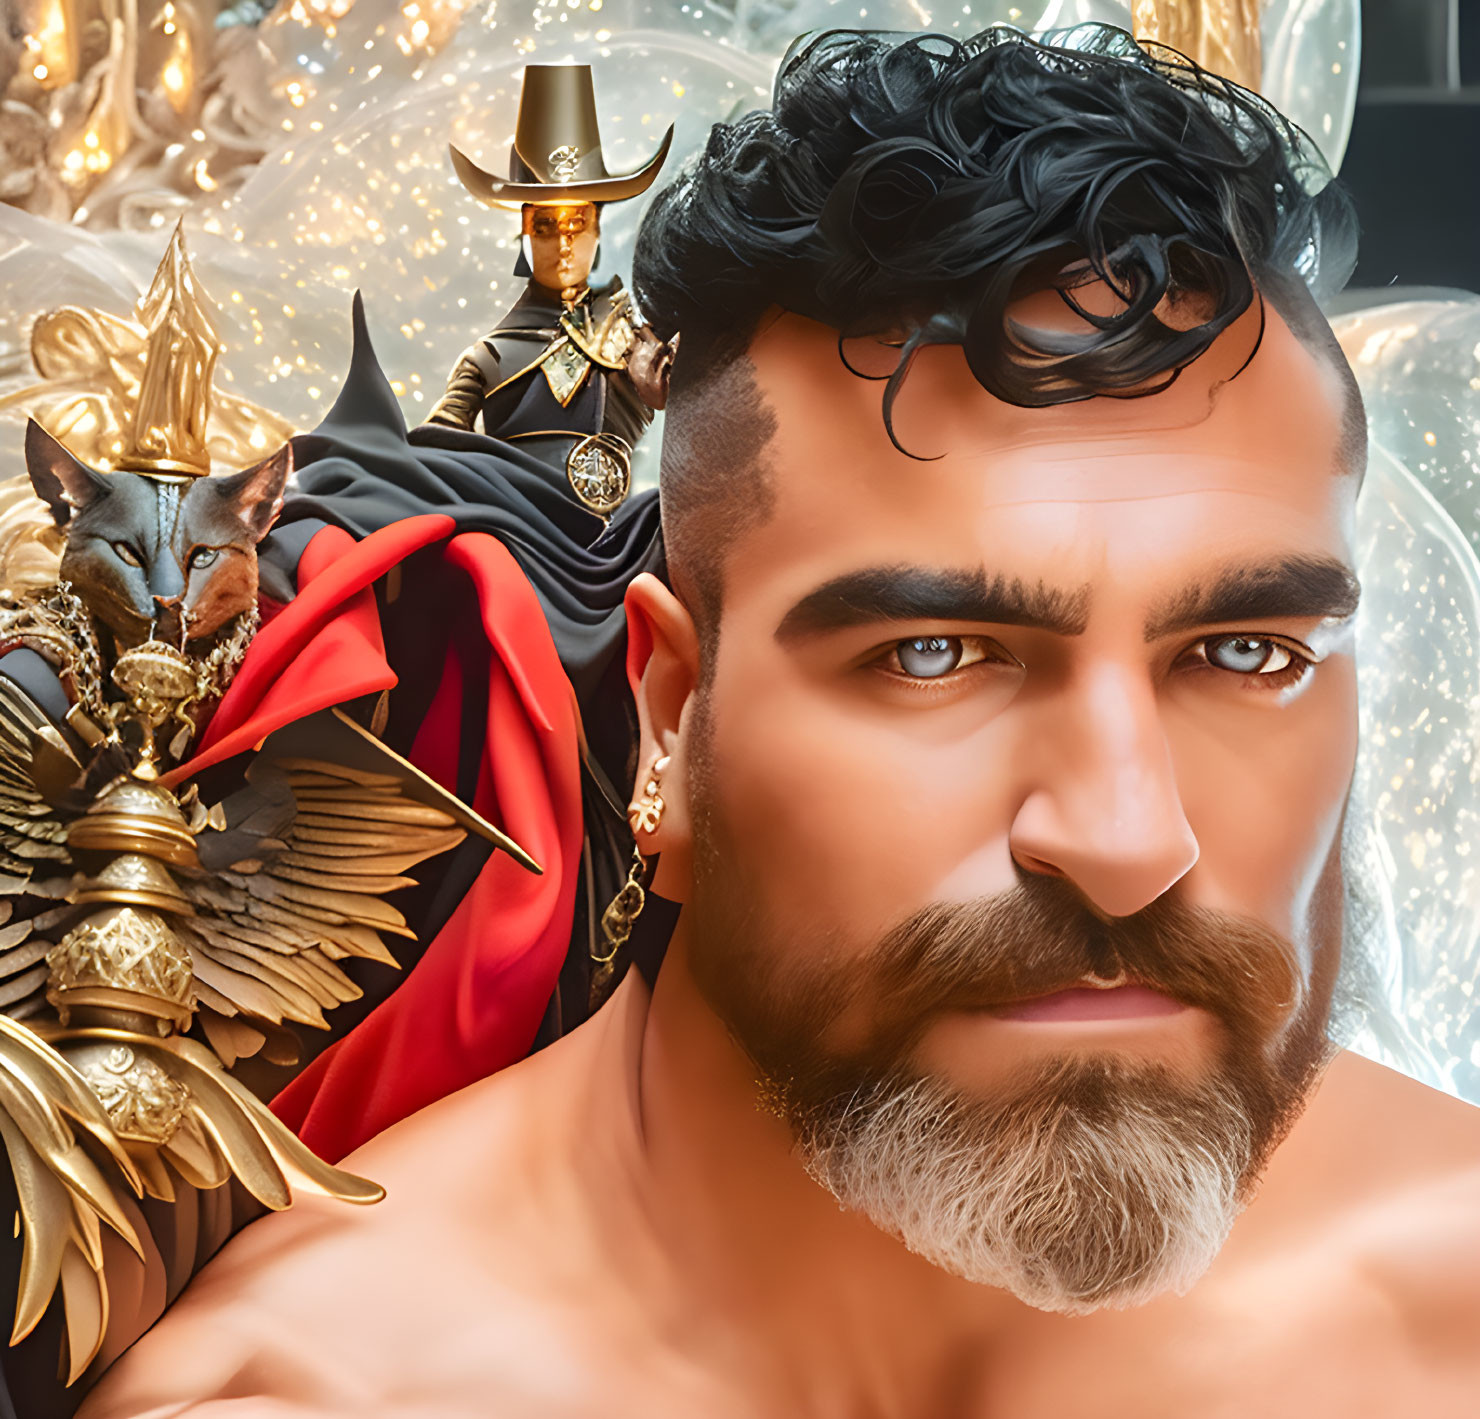 Curly-bearded man with intense gaze and whimsical background portrait.